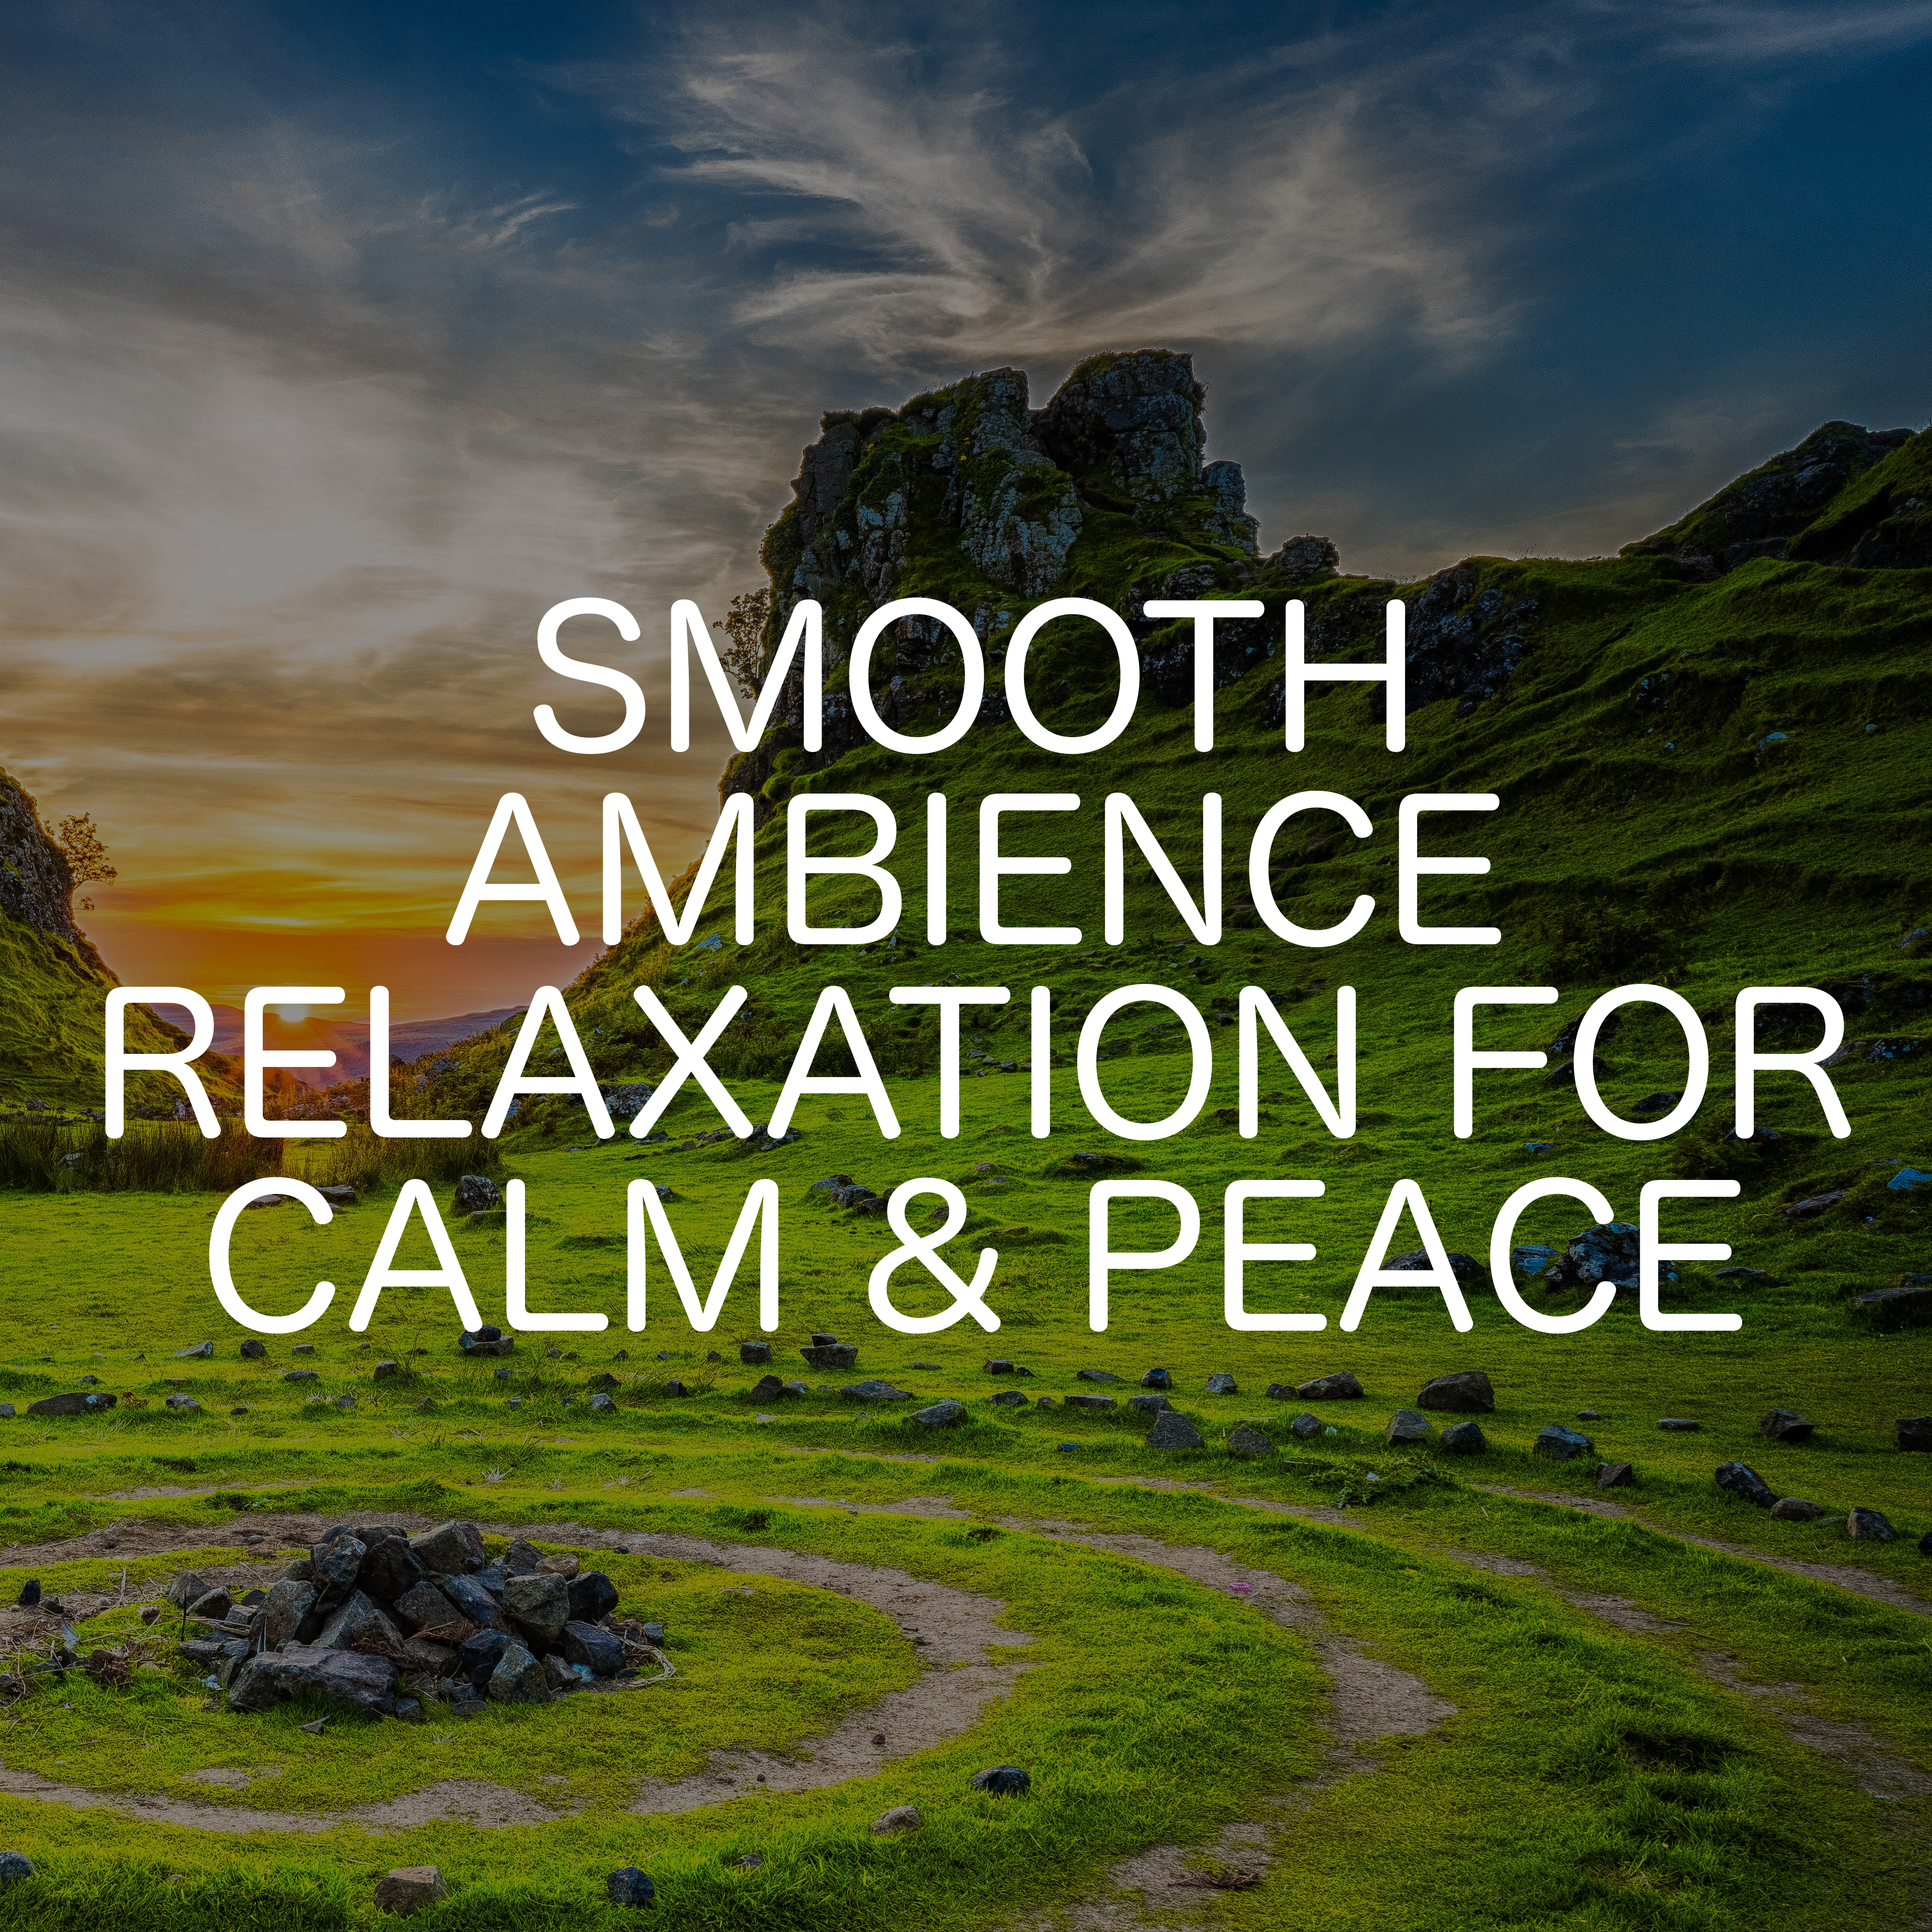 Smooth Ambience Relaxation For Calm And Peace